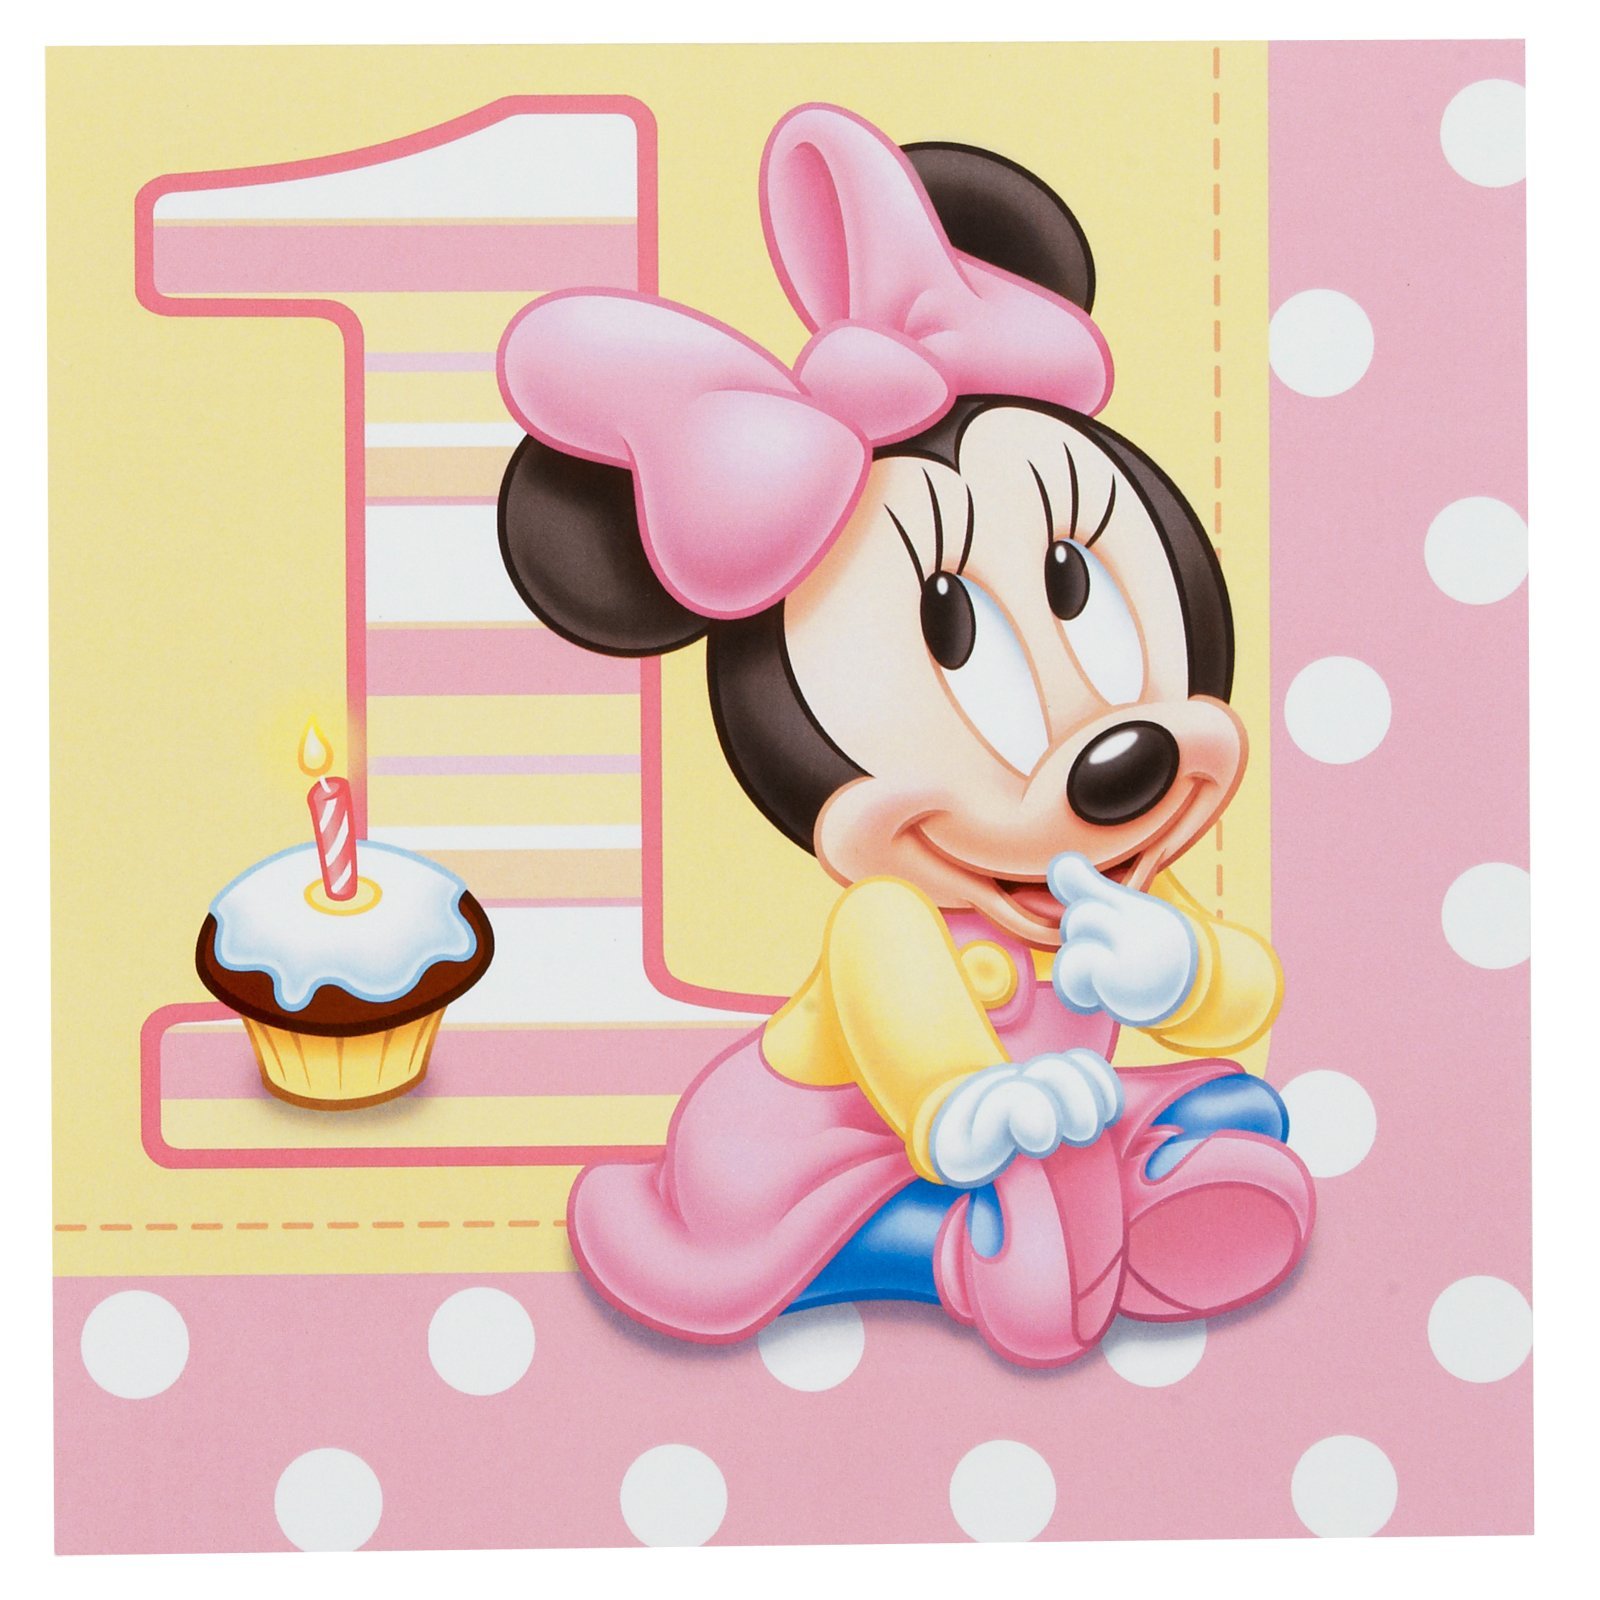 Baby Minnie Mouse Wallpaper Mickey e minnie mouse